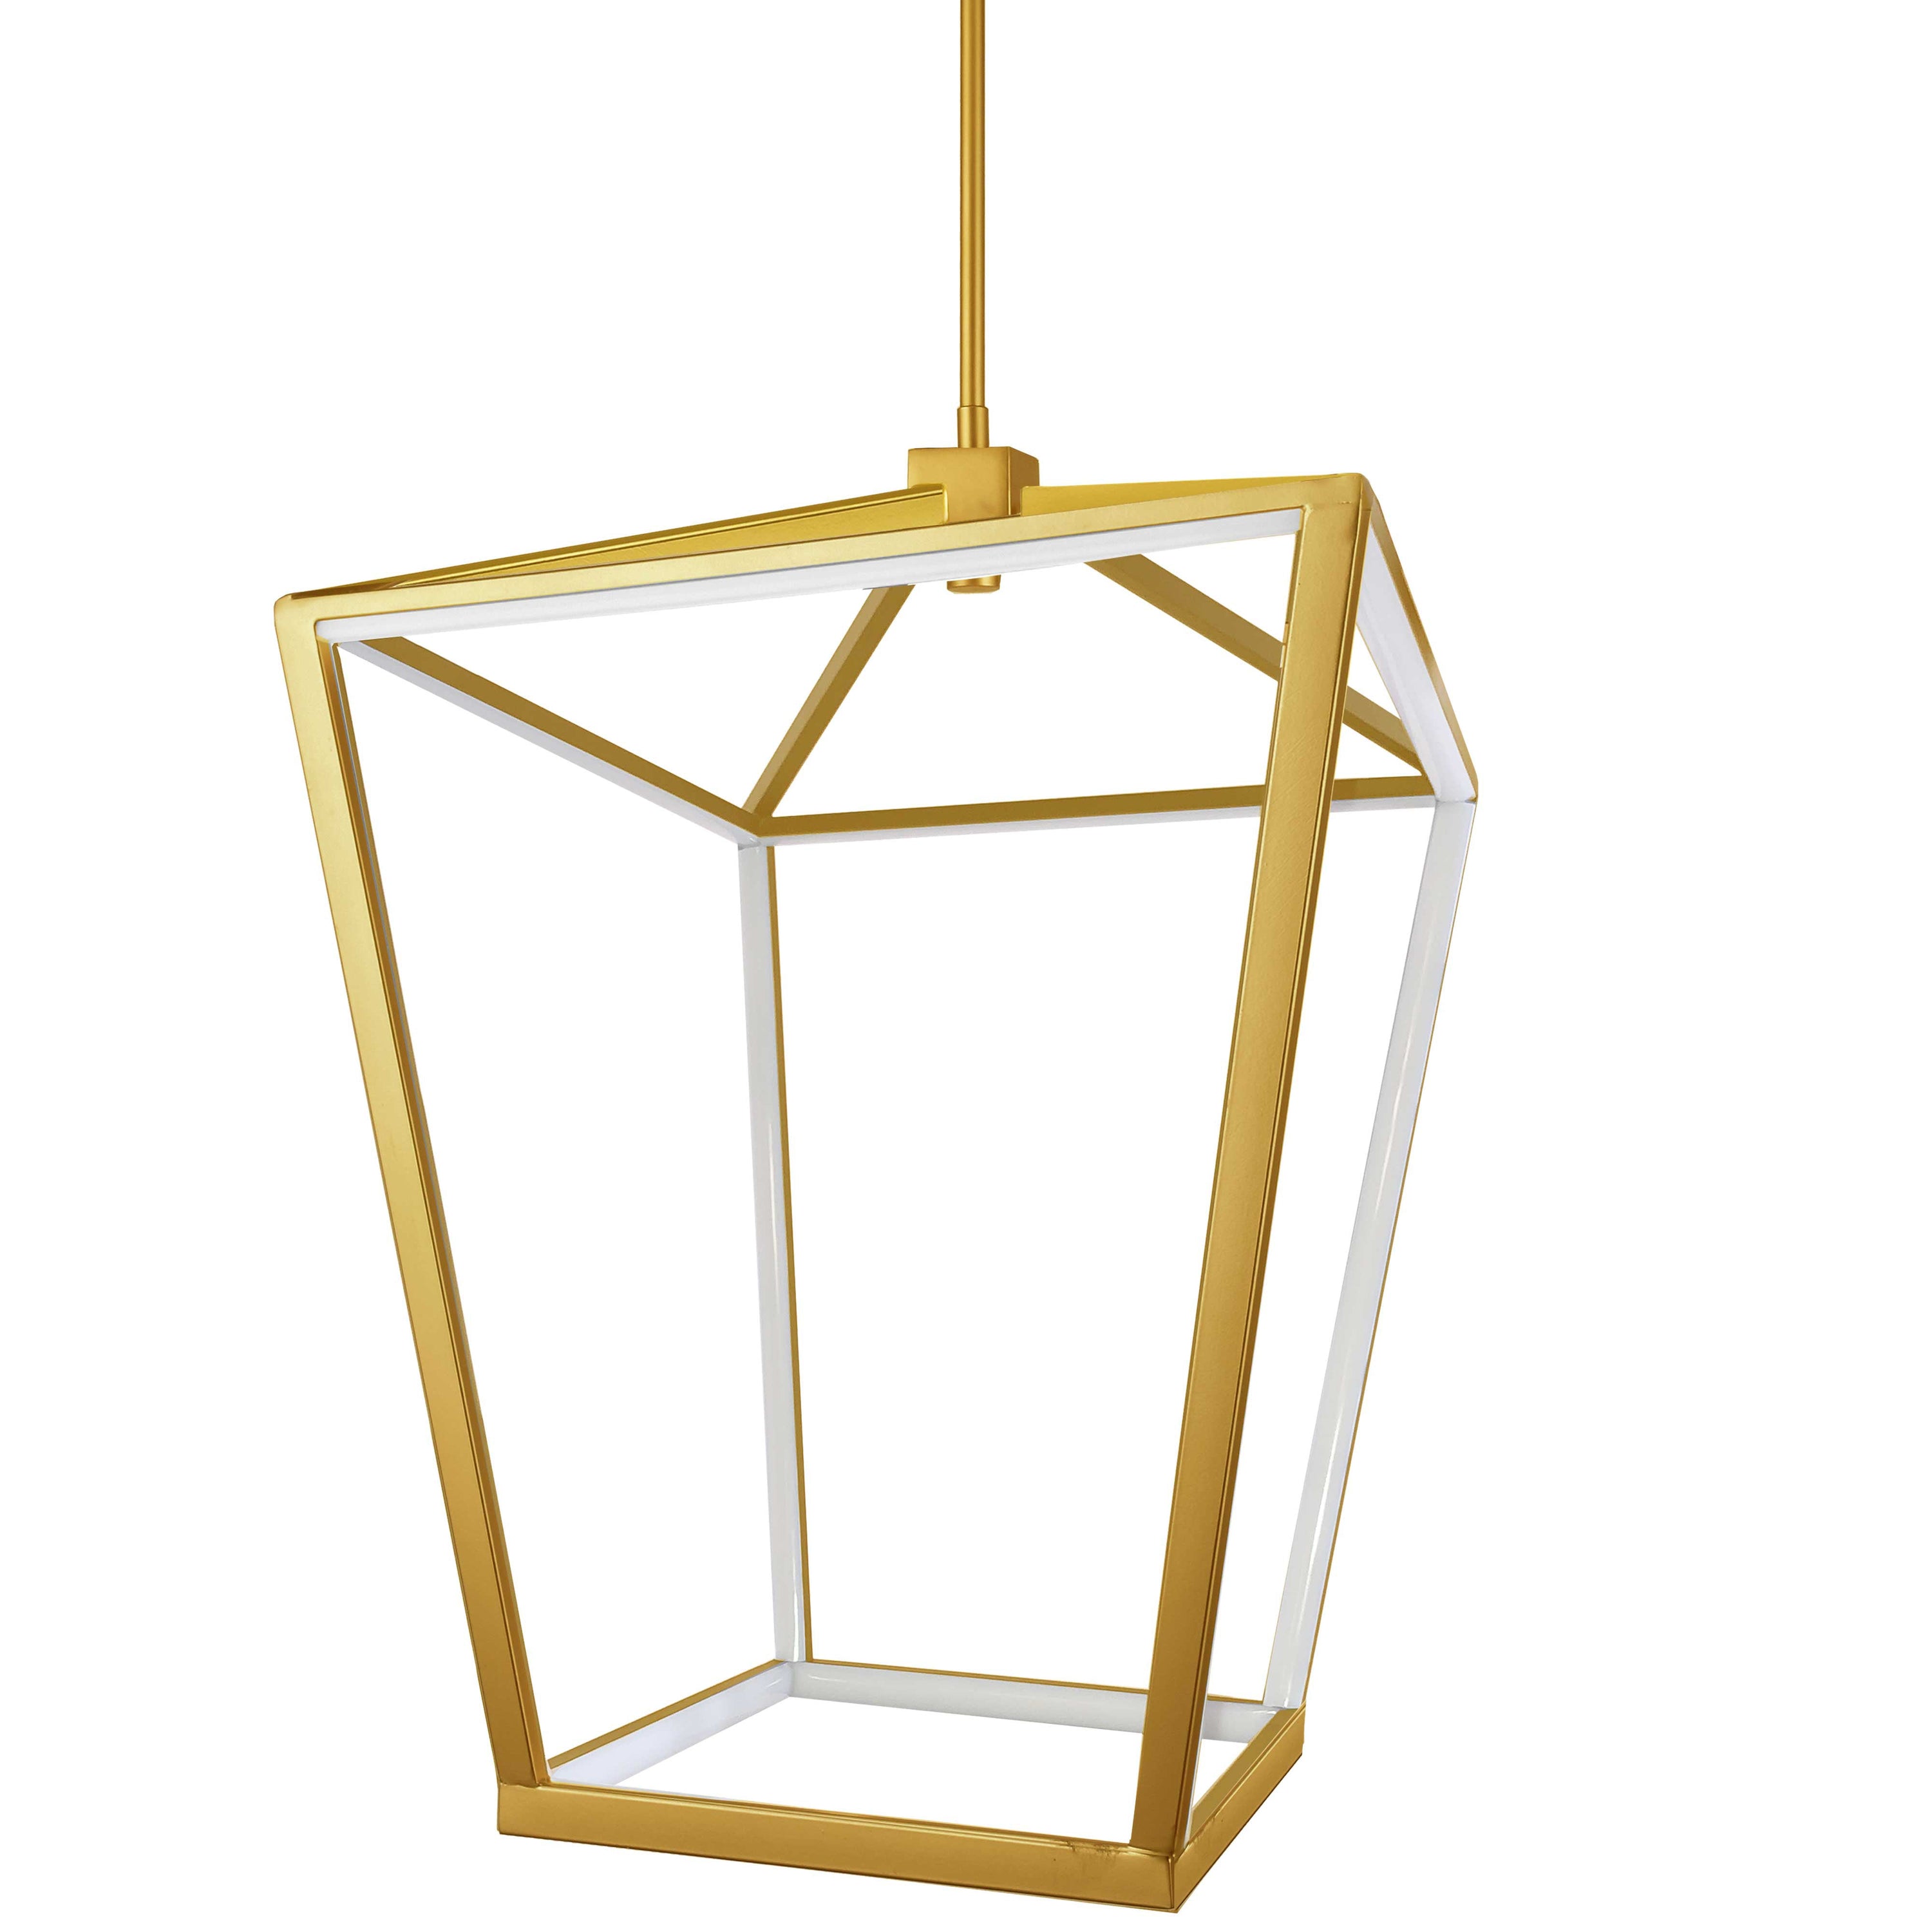 Dainolite Cage - CAG-2664C-AGB - 64W Chandelier Fixture, Aged Brass with White Diffuser - Aged Brass